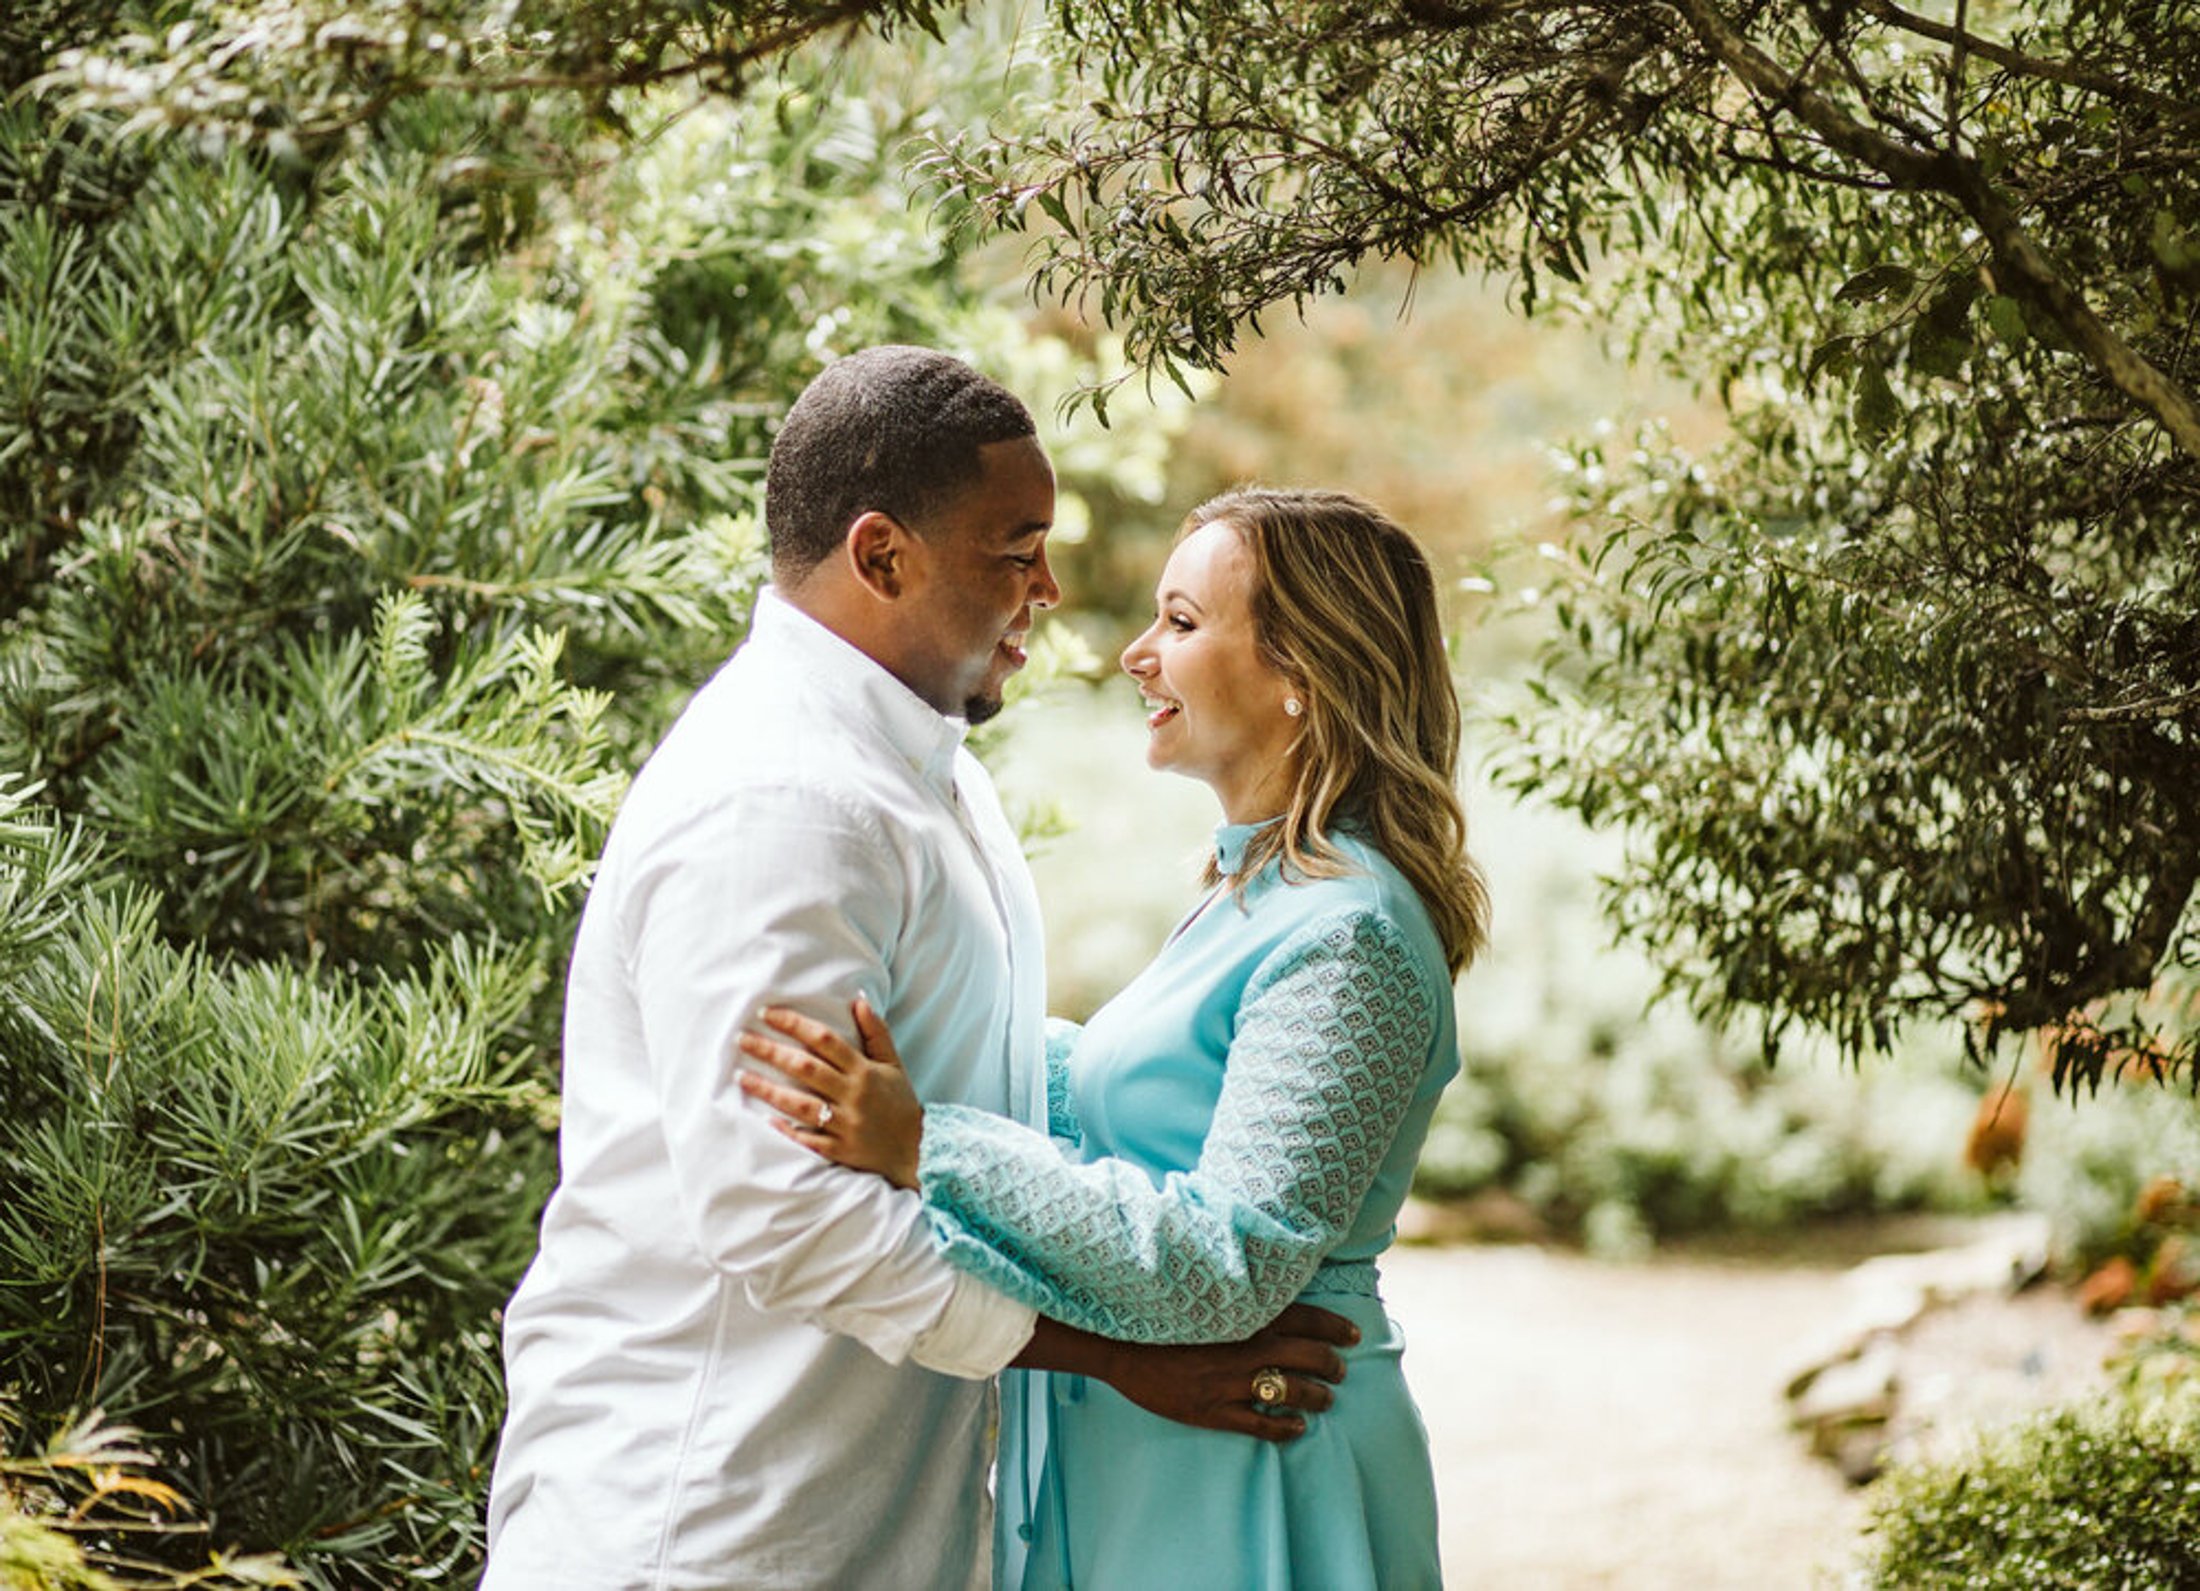 5 of the best places to take engagment photos in Greenville, SC | SC Botanical Gardens-7.jpg